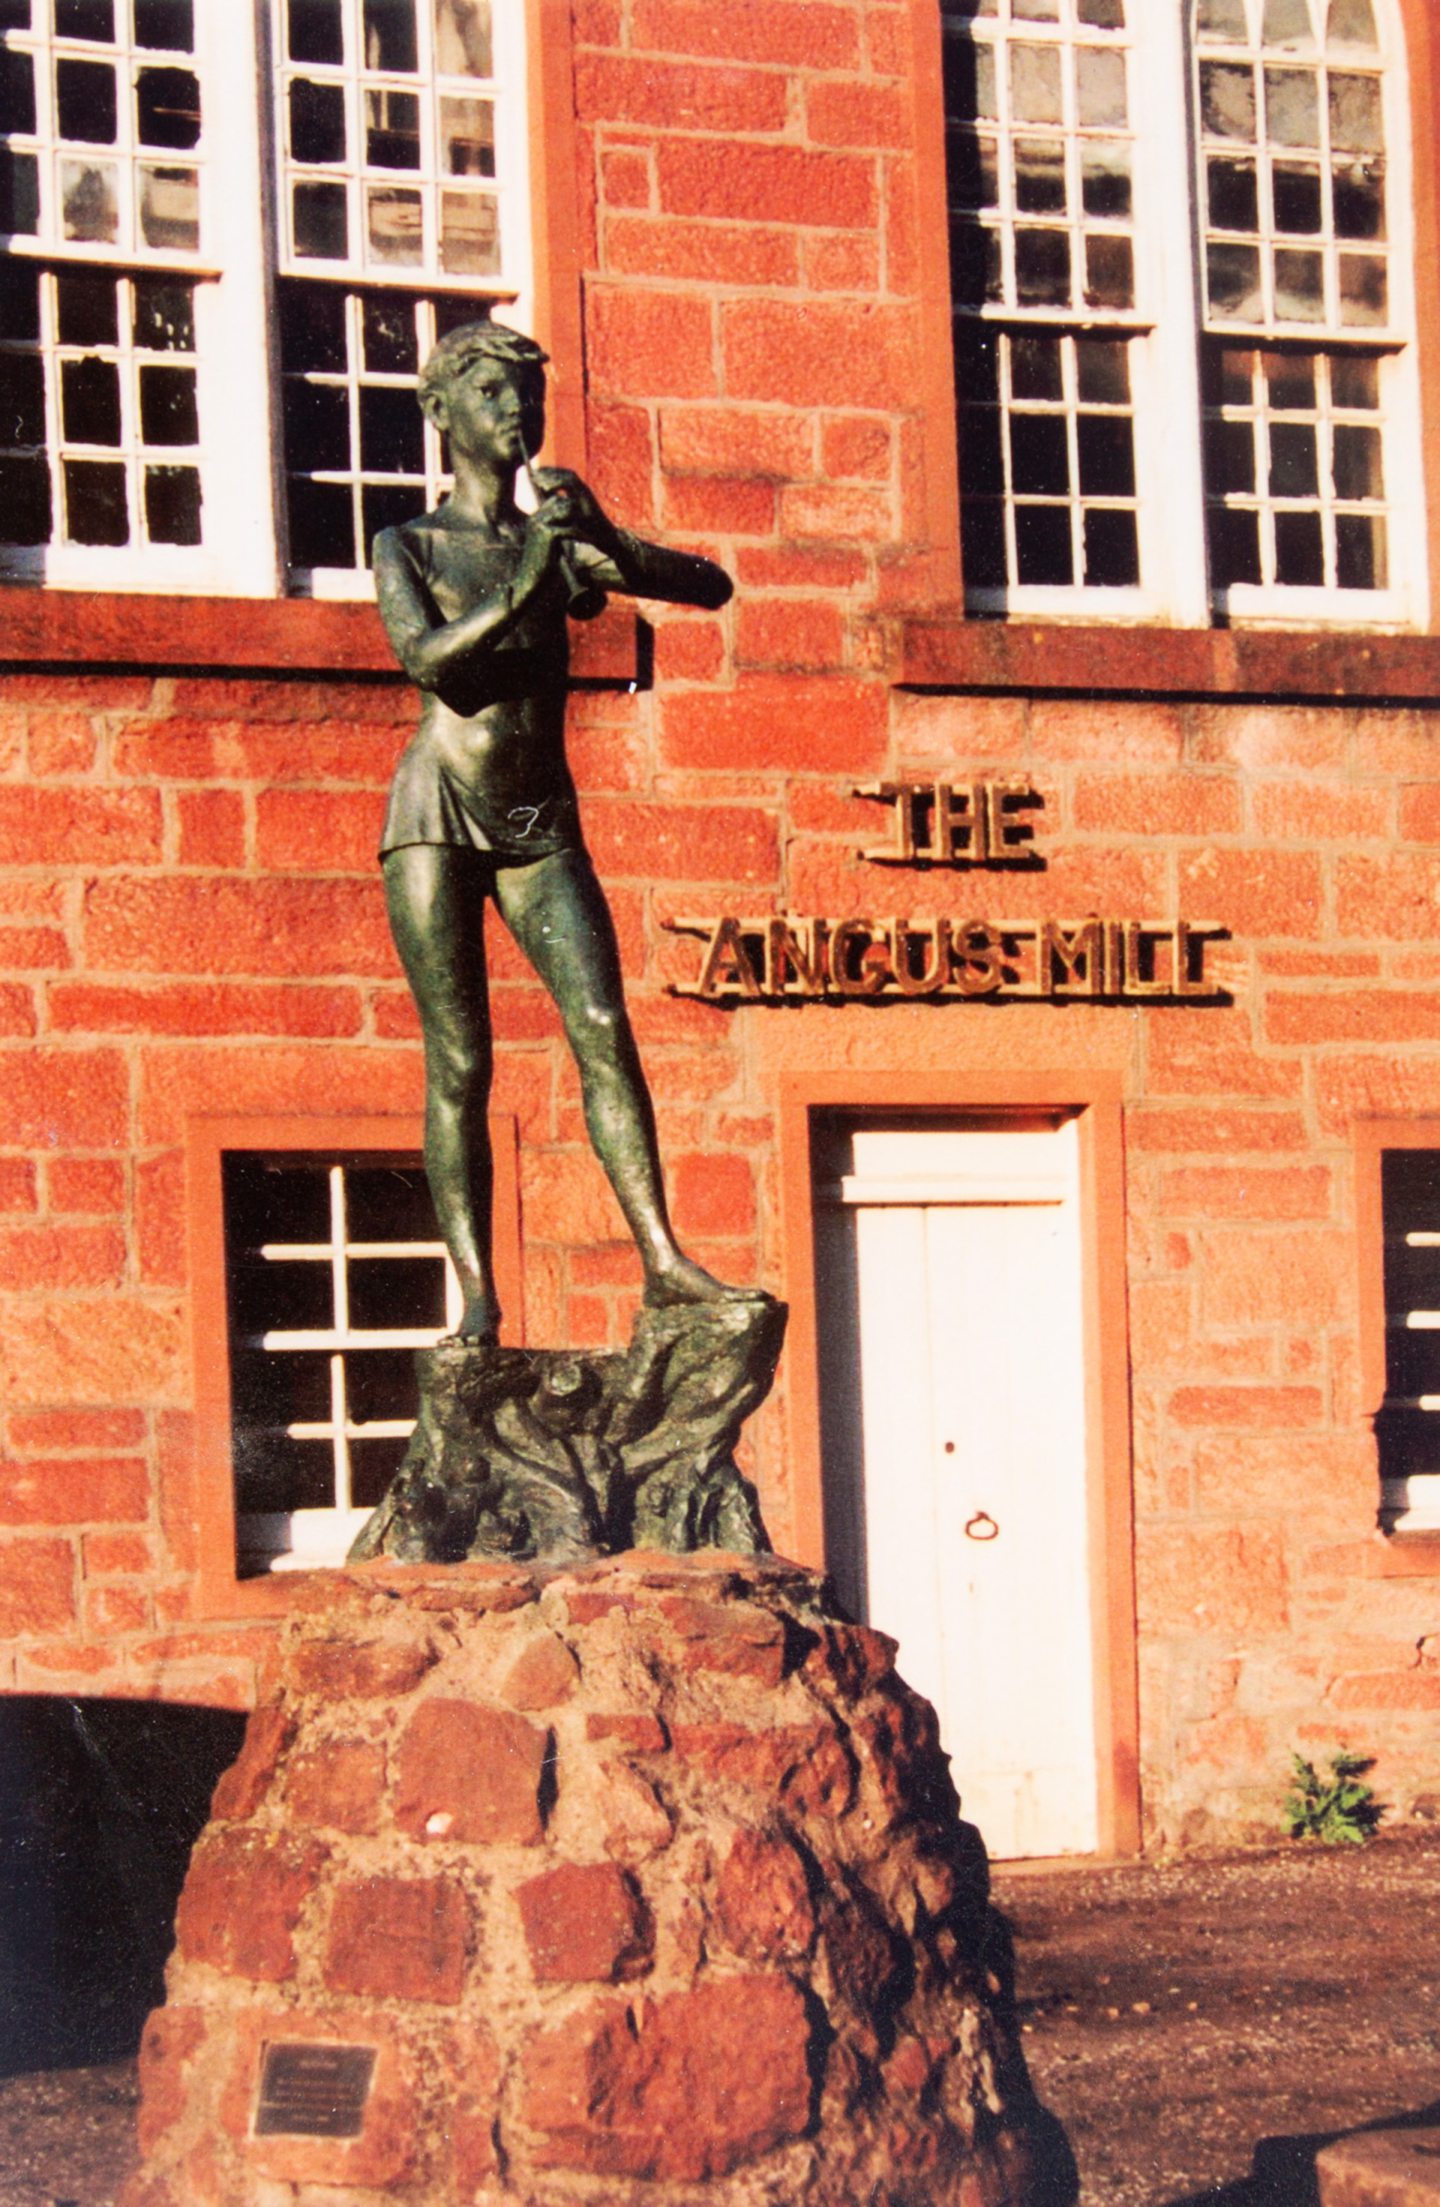 A photograph of the Peter Pan Statue which remains in the heart of Kirriemuir.